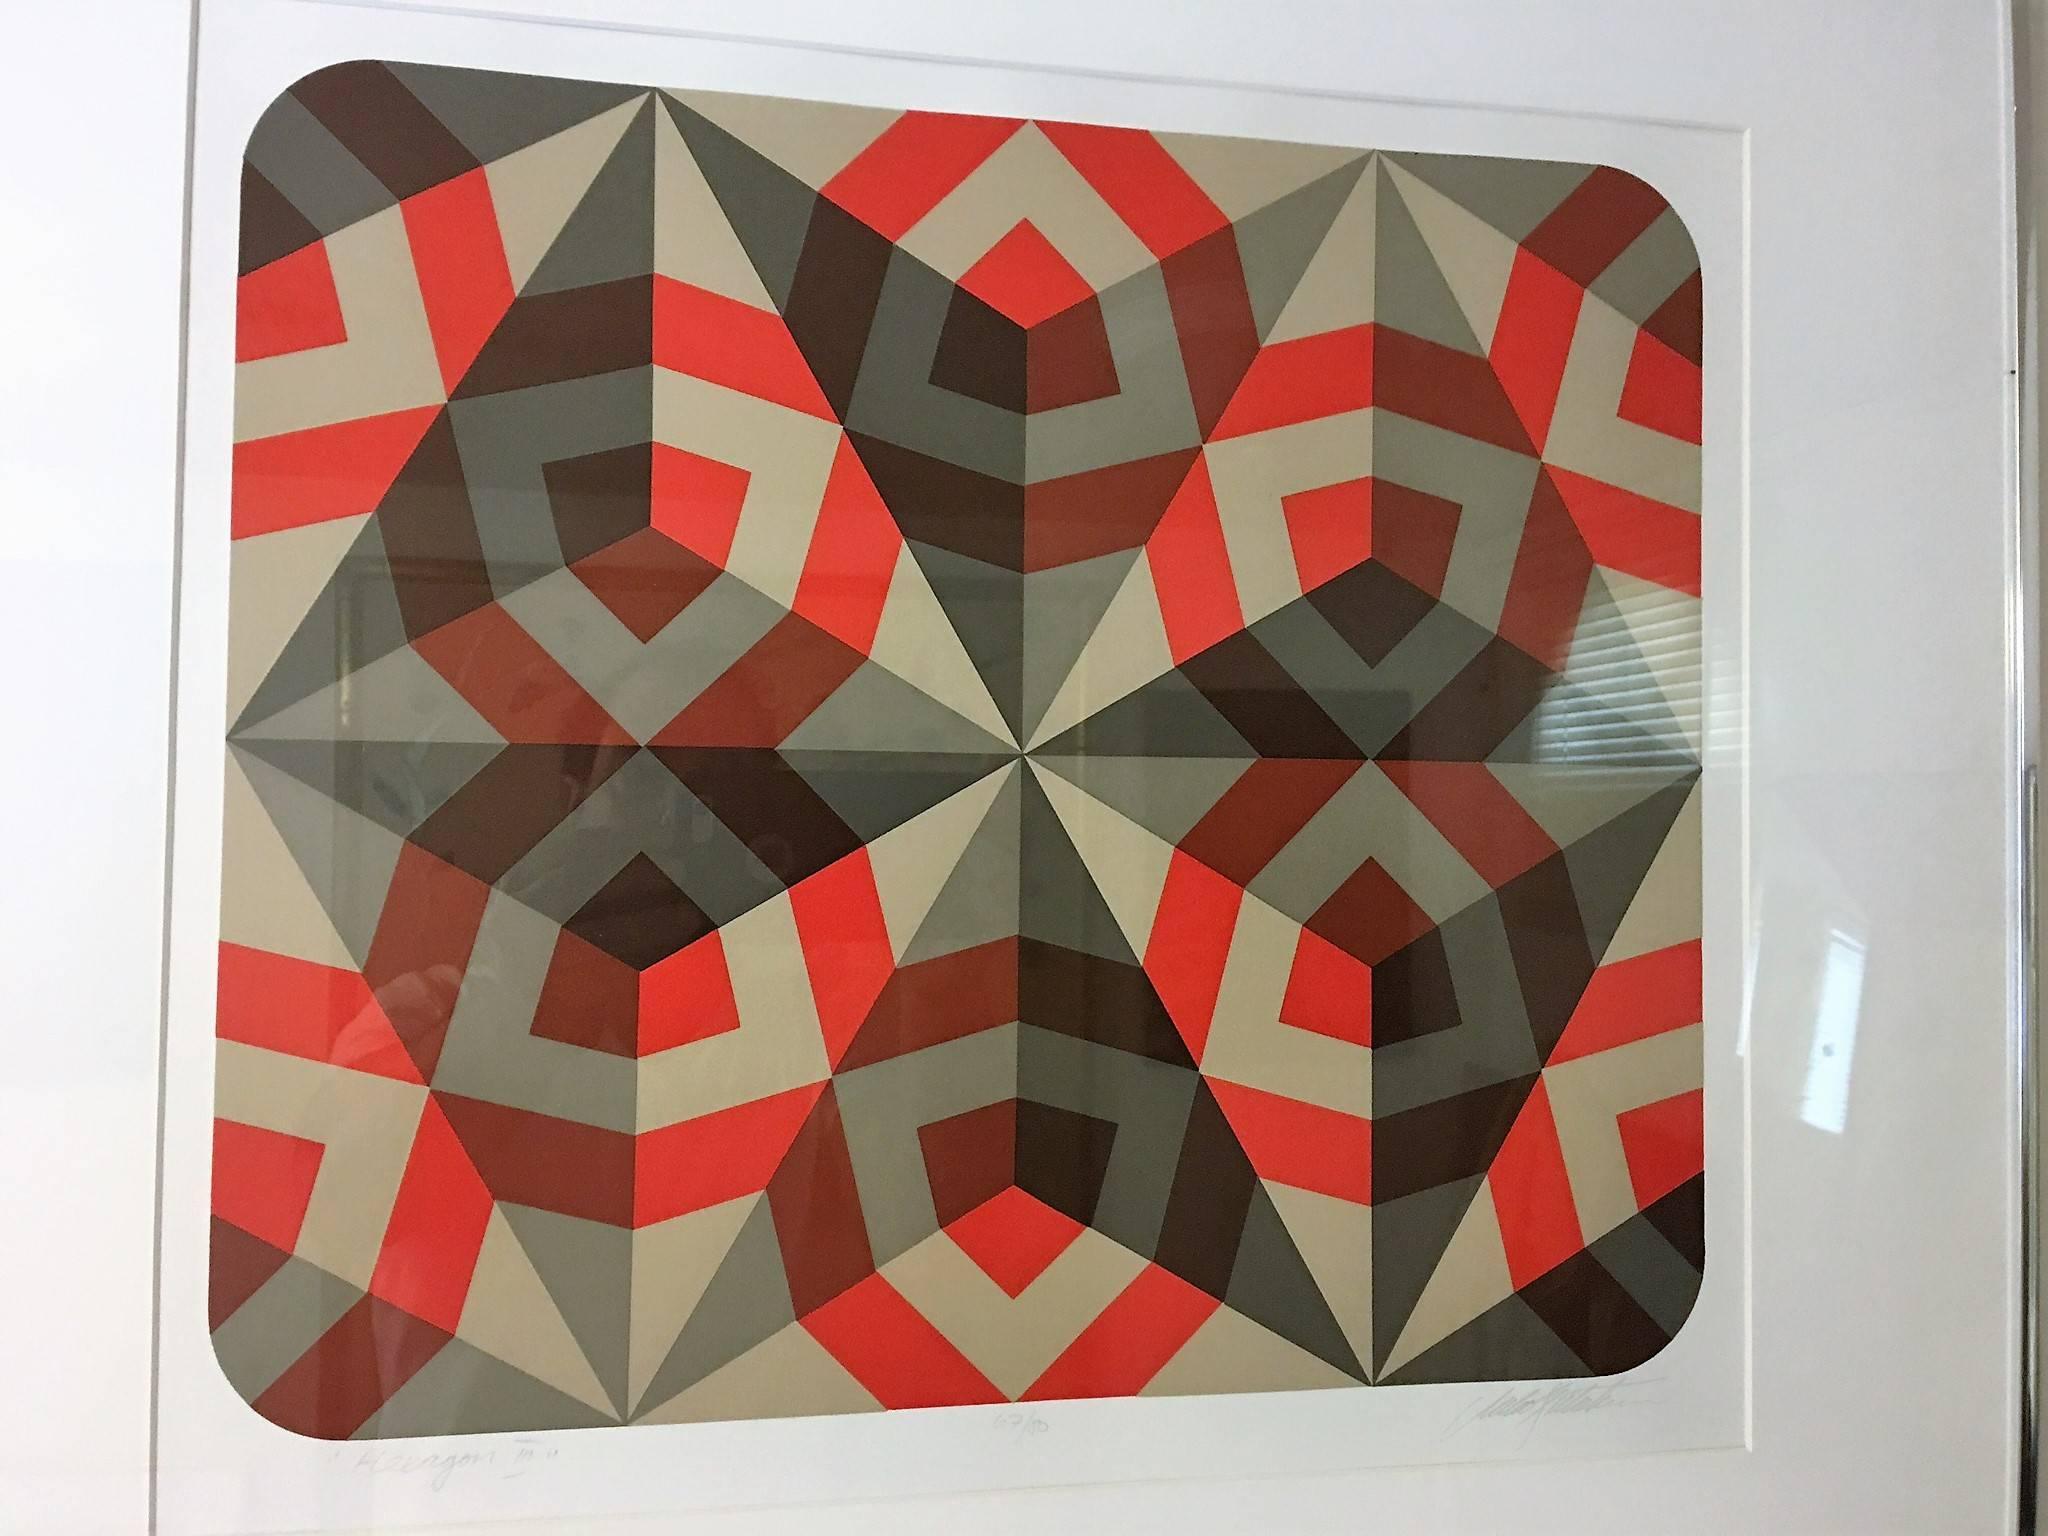 Exciting Pair of Signed Colorful Hexagonal Silkscreens in Manner of Vasarely In Excellent Condition For Sale In Mount Penn, PA